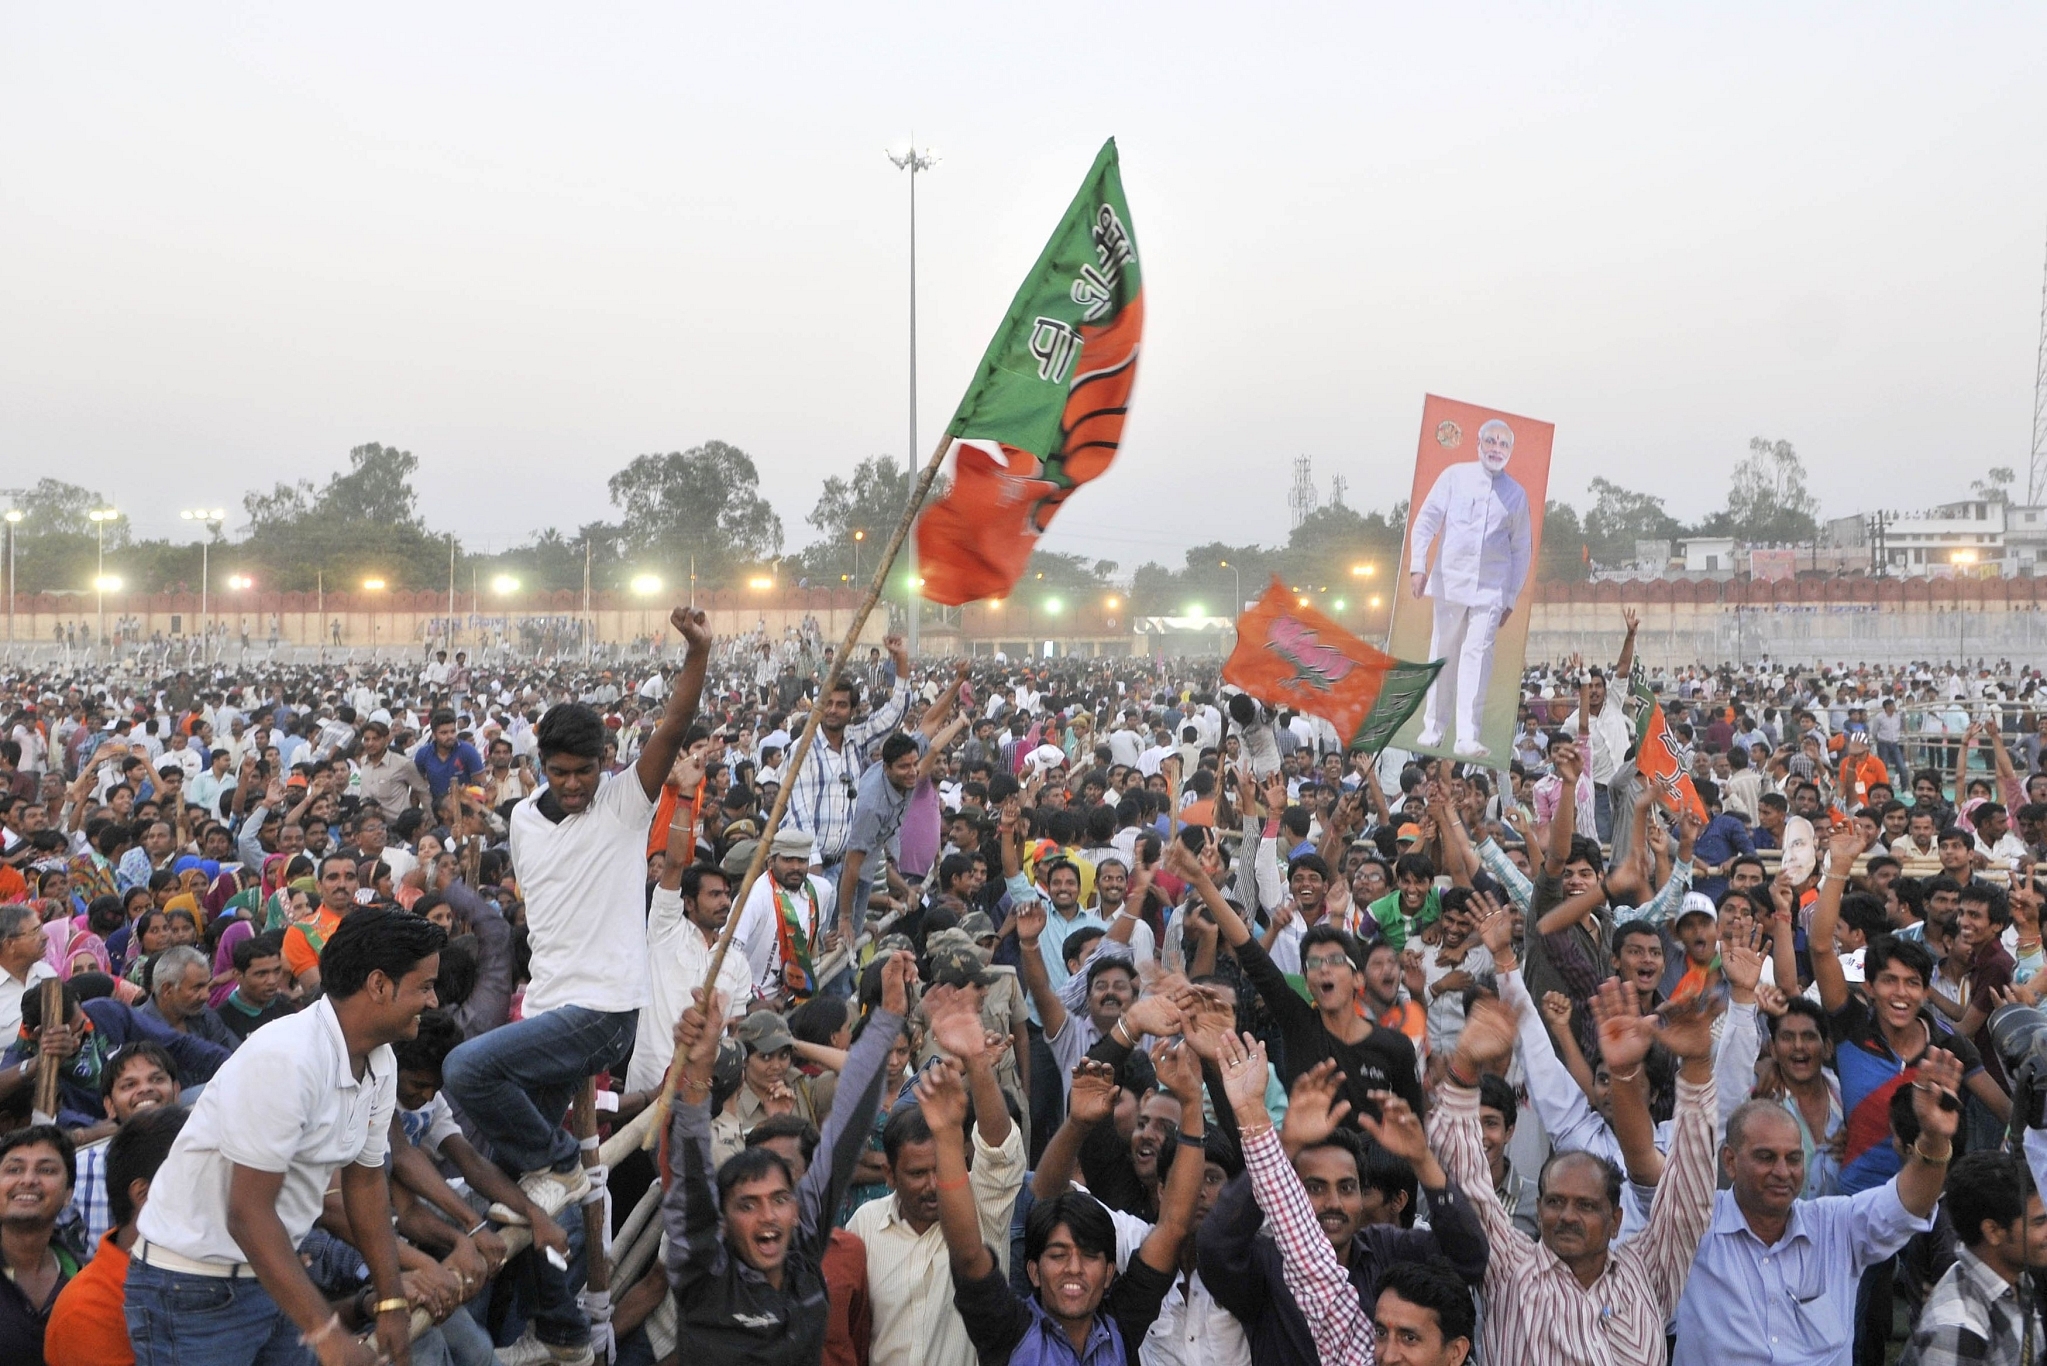  BJP supporters and workers gathered during a BJP rally (Himanshu Vyas/Hindustan Times via Getty Images)